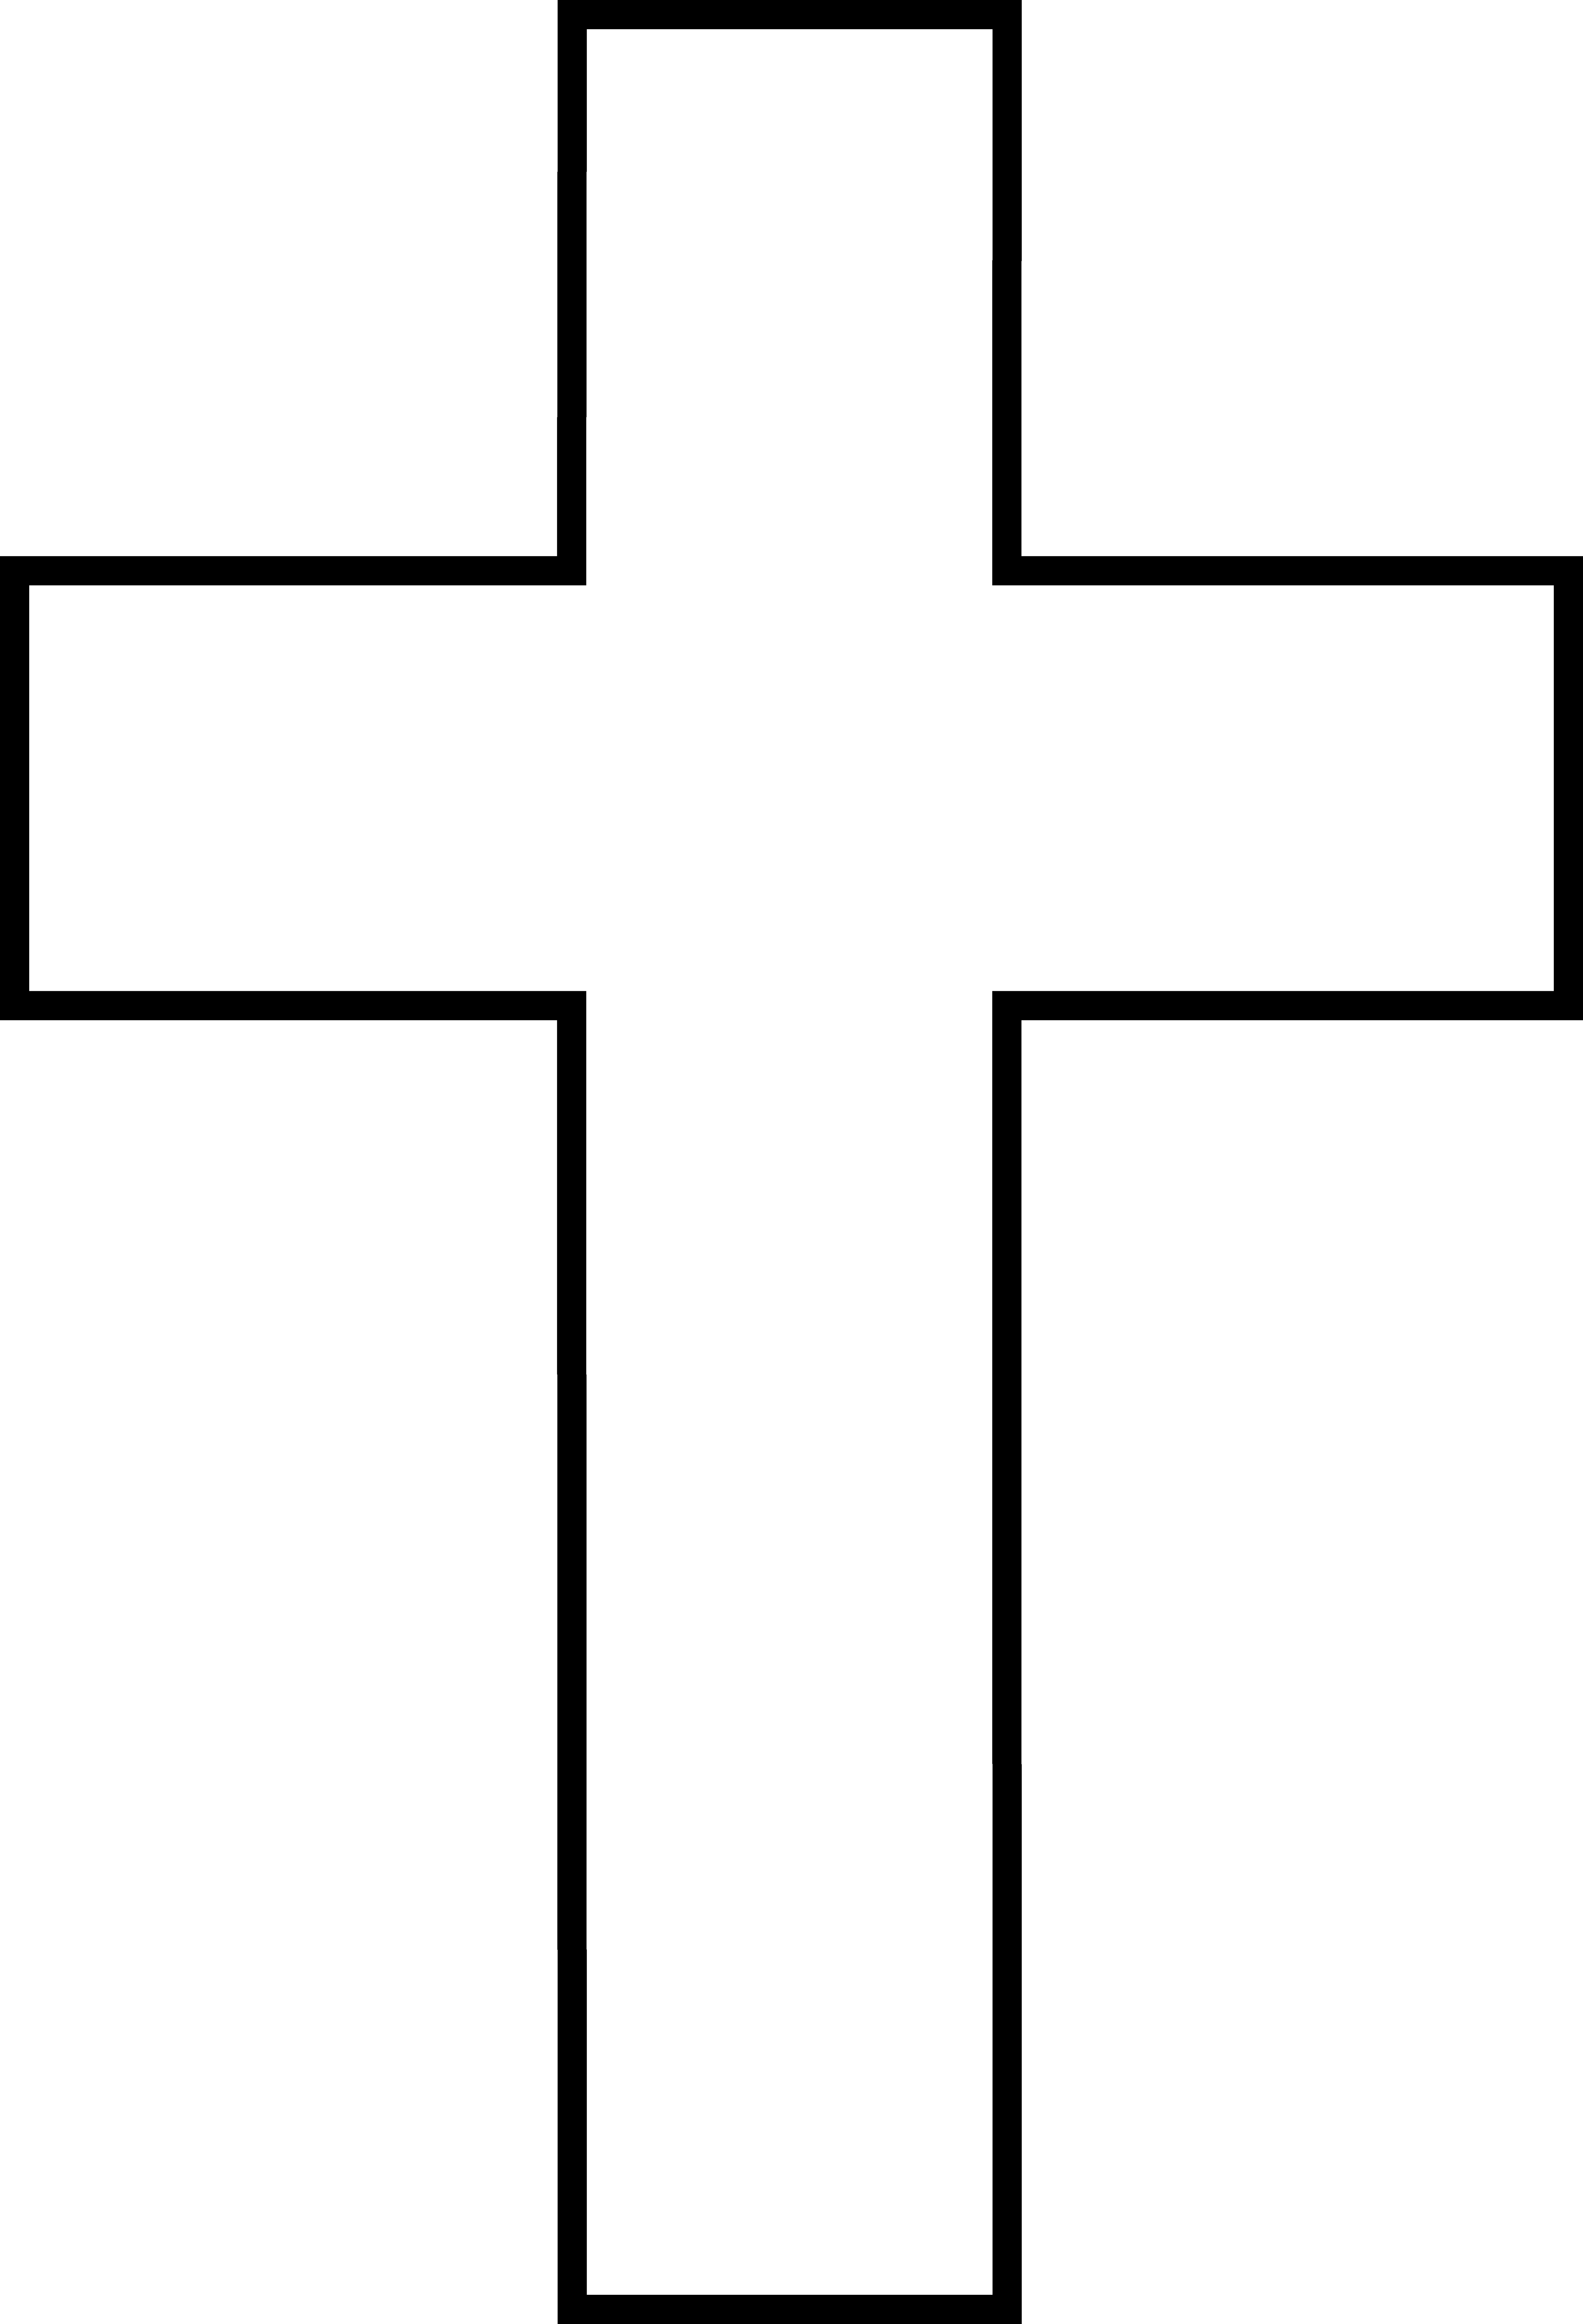 Cross black and white clipart